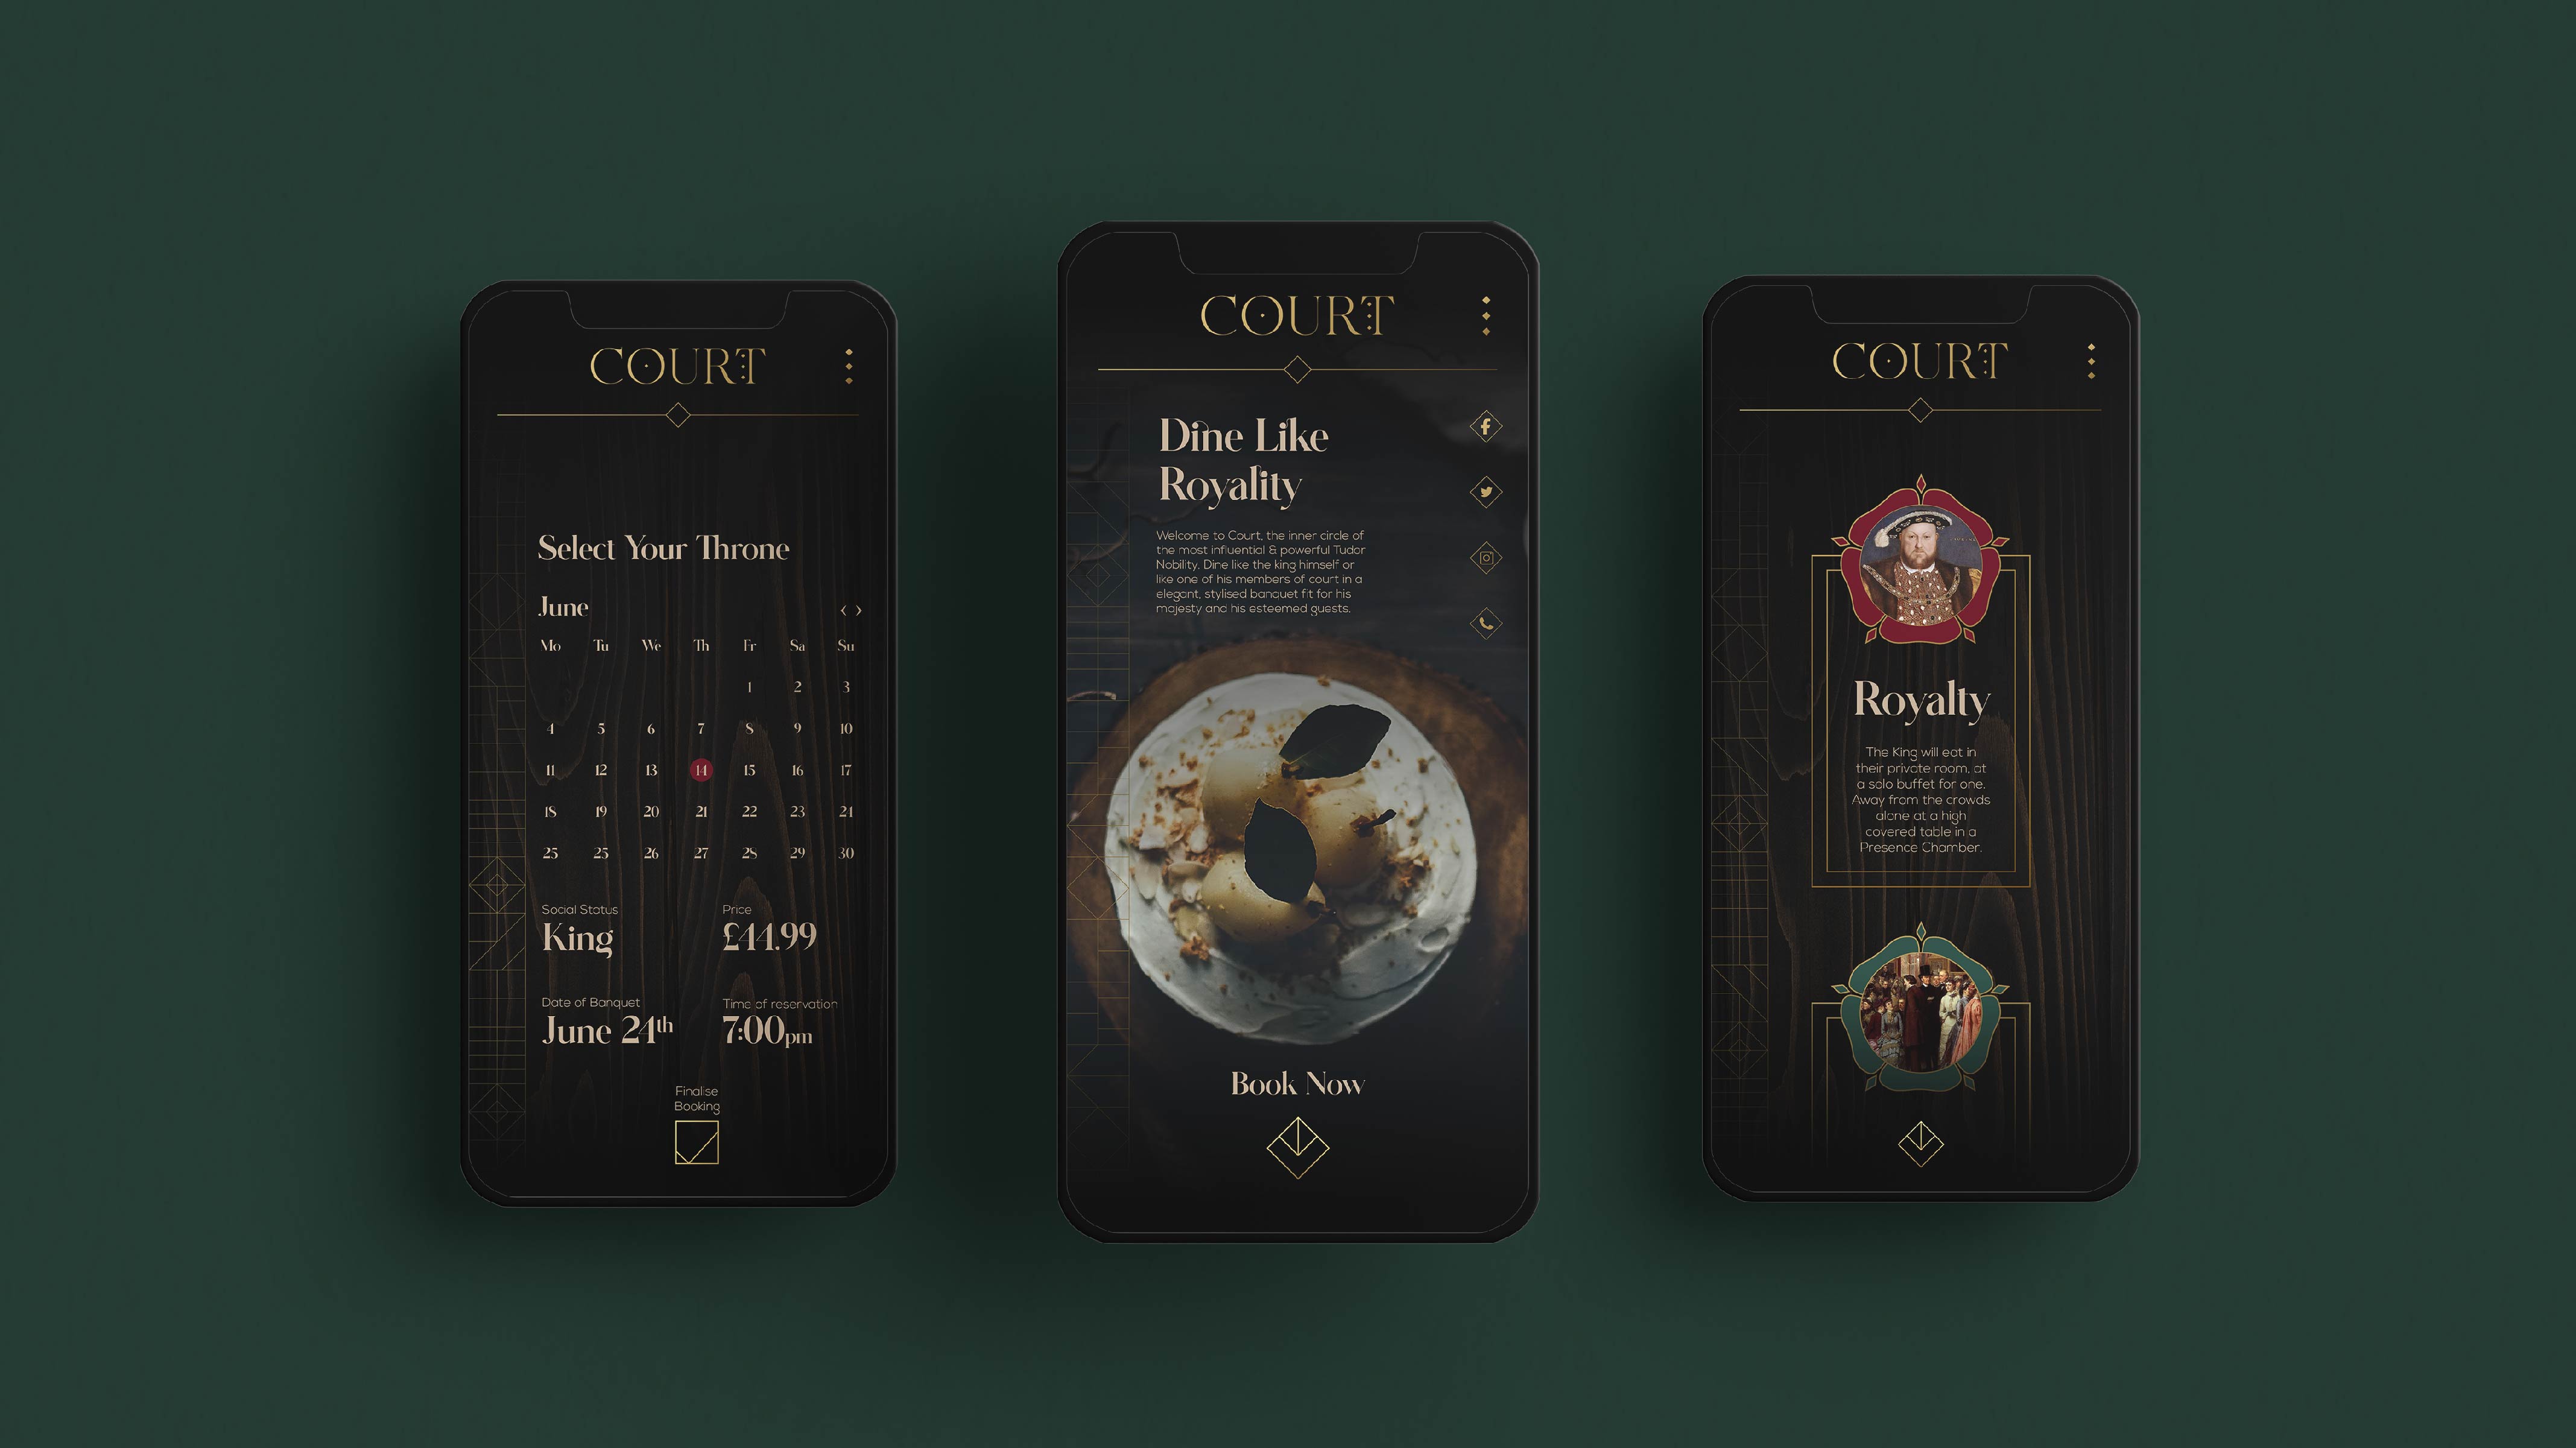 BA Graphic Communications work by Keiran O'Shea showing iPhone mockups for a responsive app for a restaurant, that is grounded in its location's history and feeling.